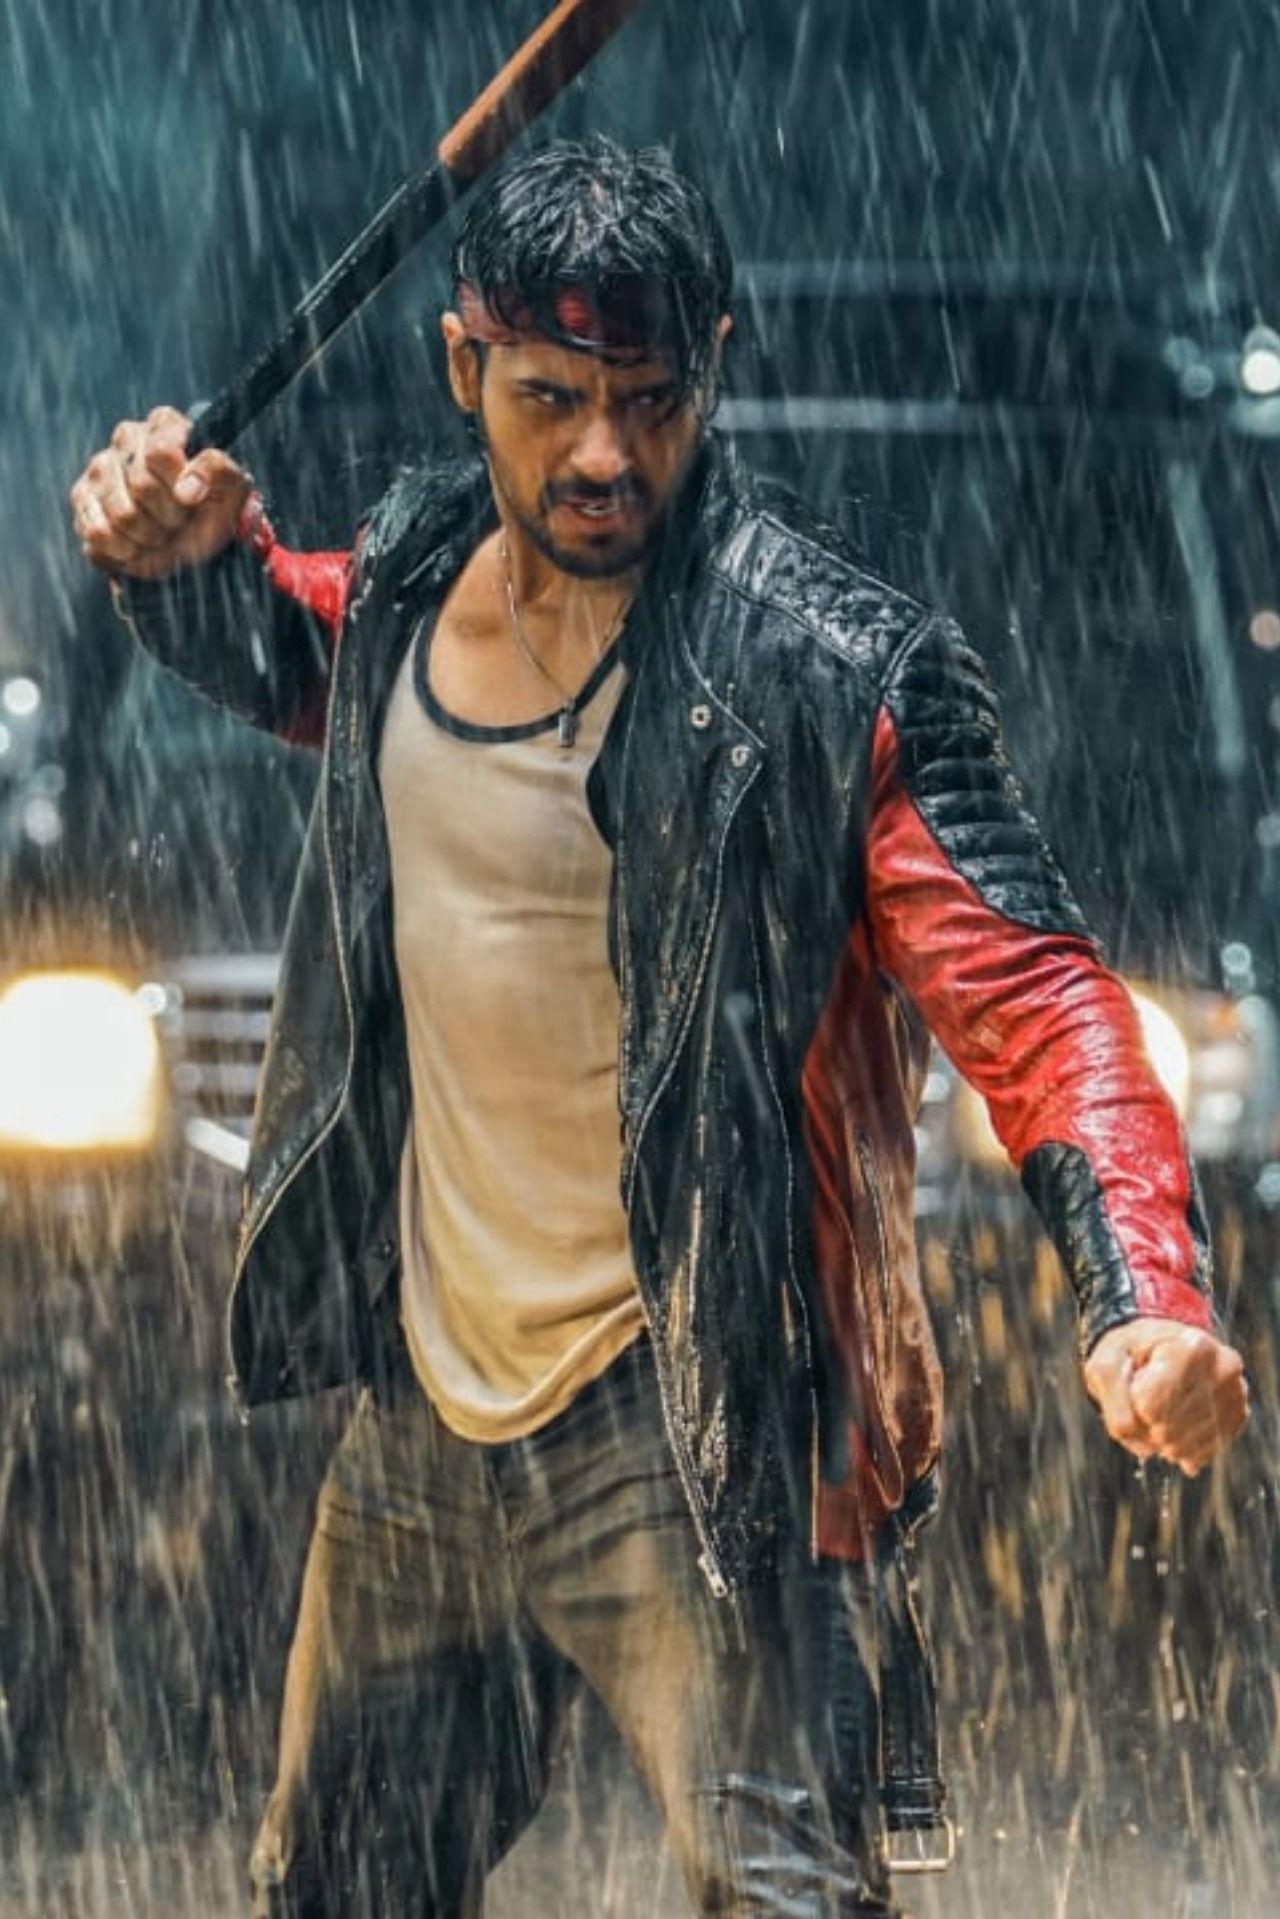 Here's a glimpse of Sidharth Malhotra from upcoming film #marjaavaan. Raghu, you looks intense